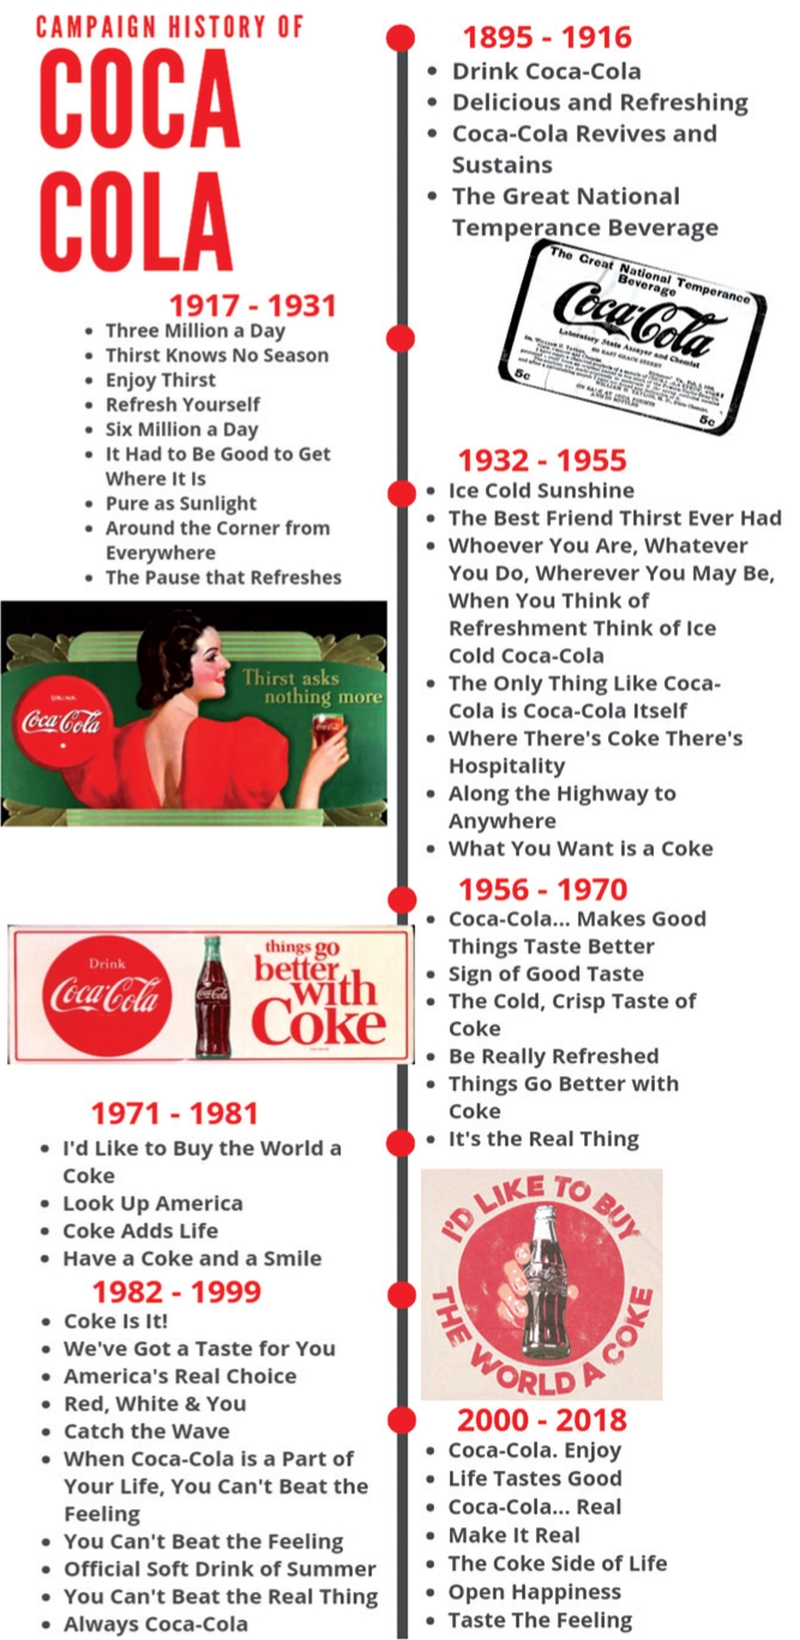 Coca-Cola : The Brand that Opened Happiness | New Business Age ...